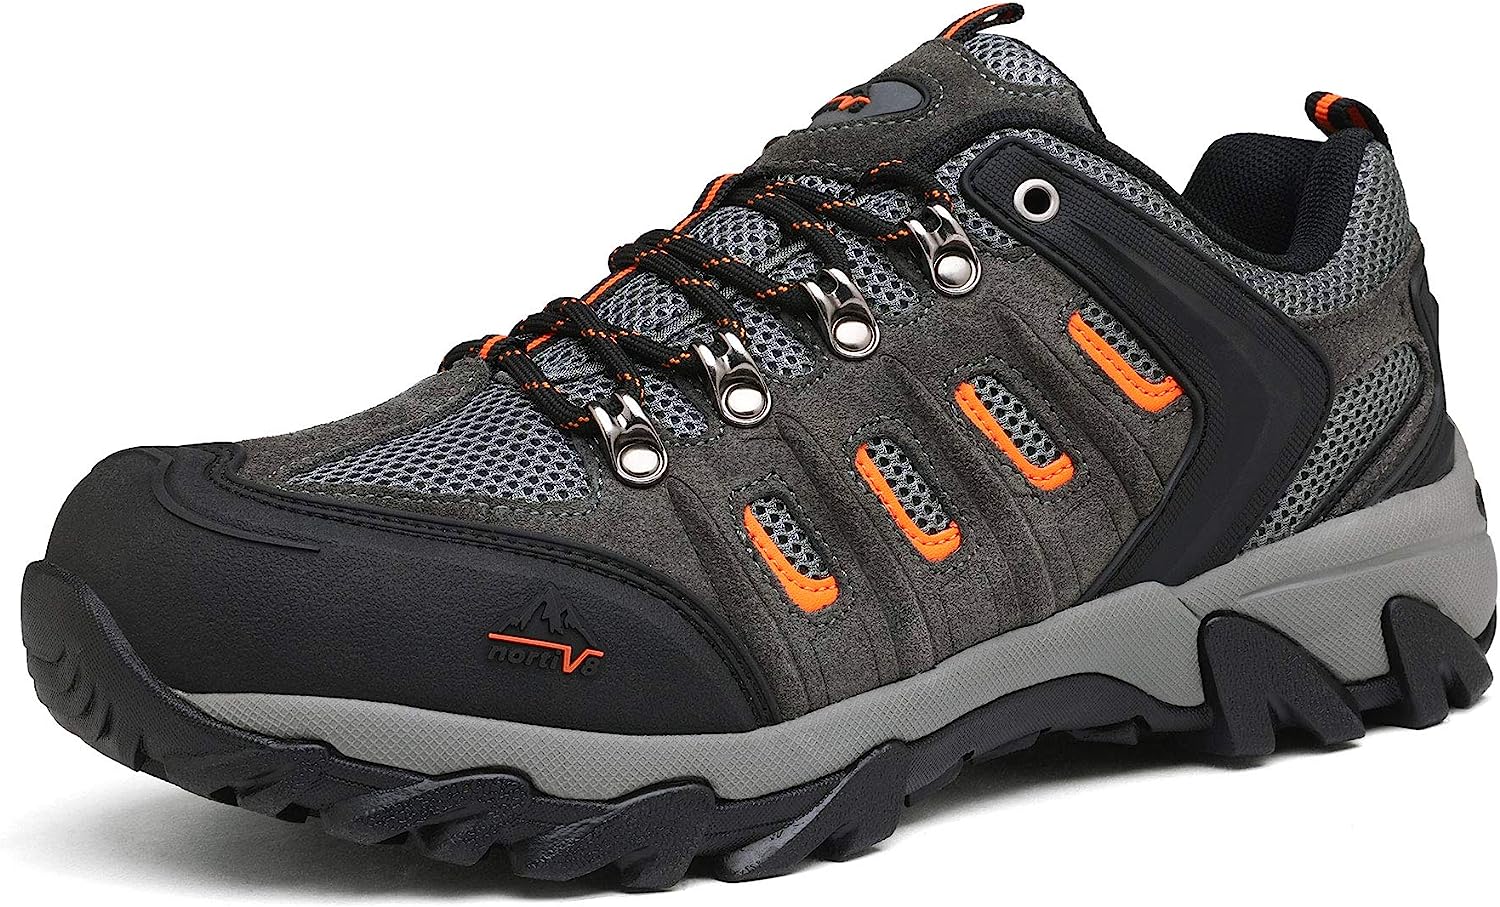 NORTIV 8 Men's Waterproof Hiking Shoes Leather Low-Top [...]